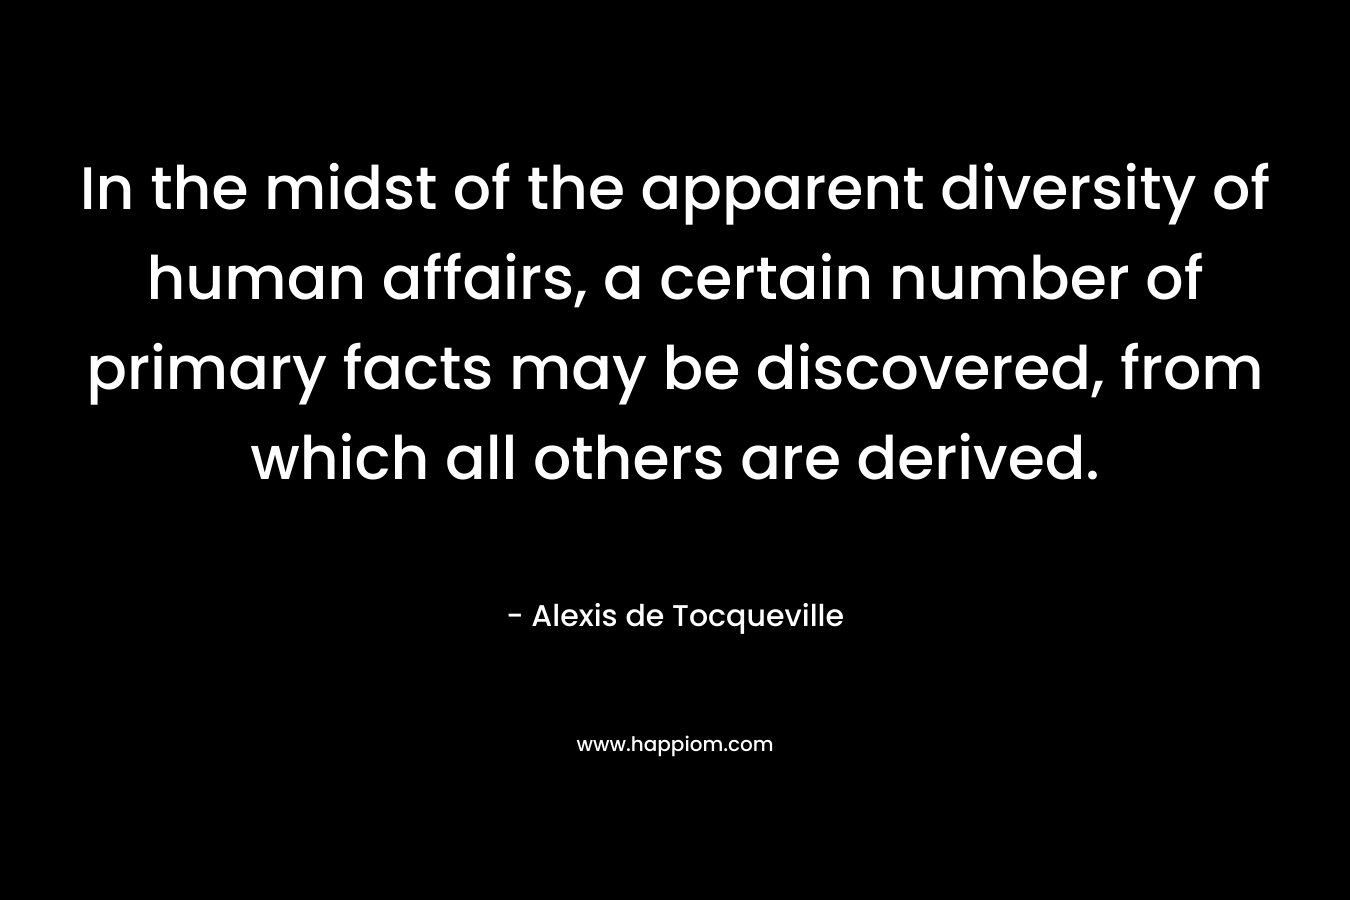 In the midst of the apparent diversity of human affairs, a certain number of primary facts may be discovered, from which all others are derived. – Alexis de Tocqueville